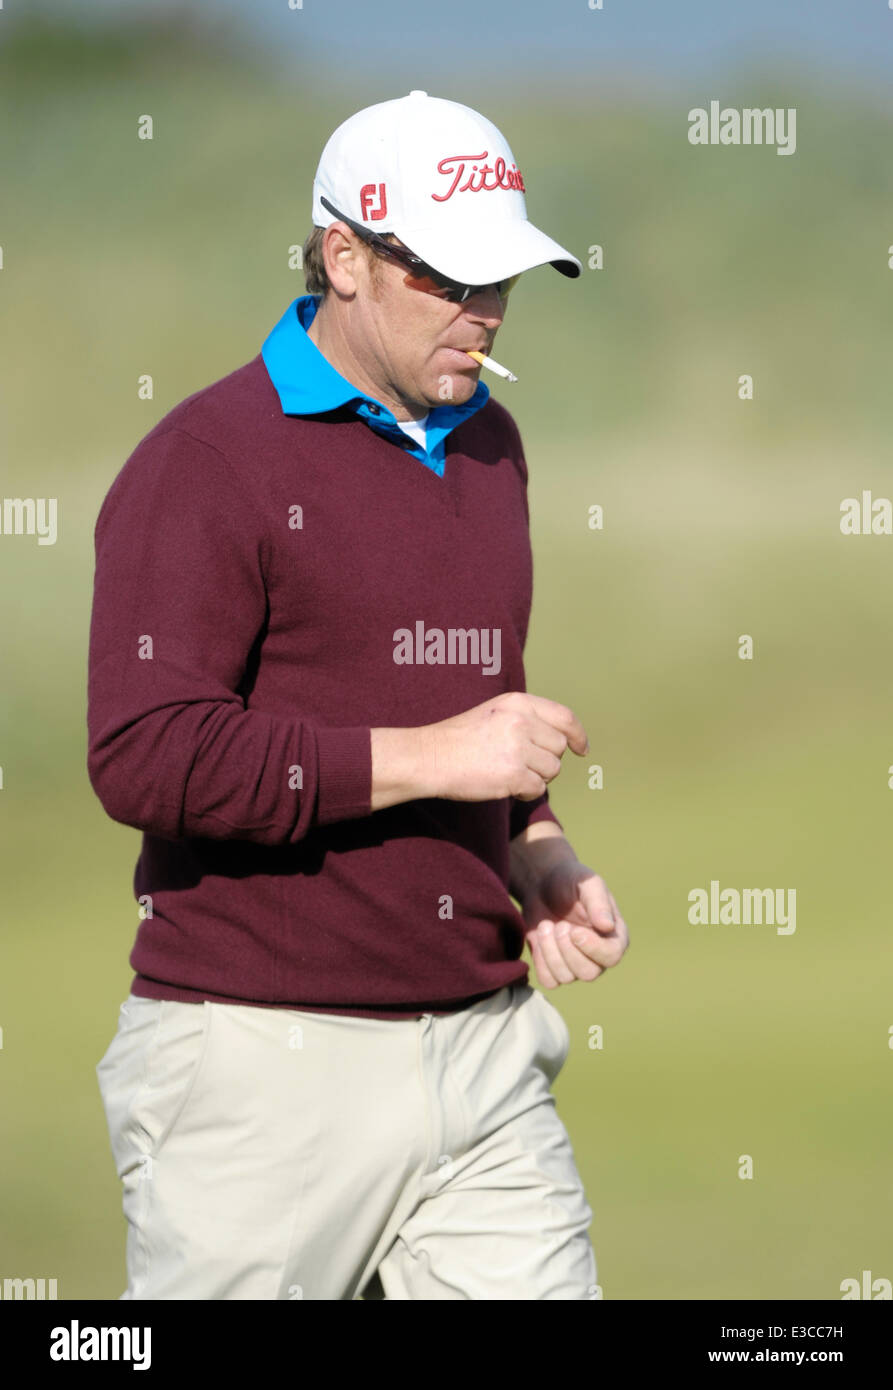 Shane Warne puffs on a cigarette between shots in the Alfred Dunhill Links Championship in Kingsbarns  Featuring: Shane Warne Wh Stock Photo